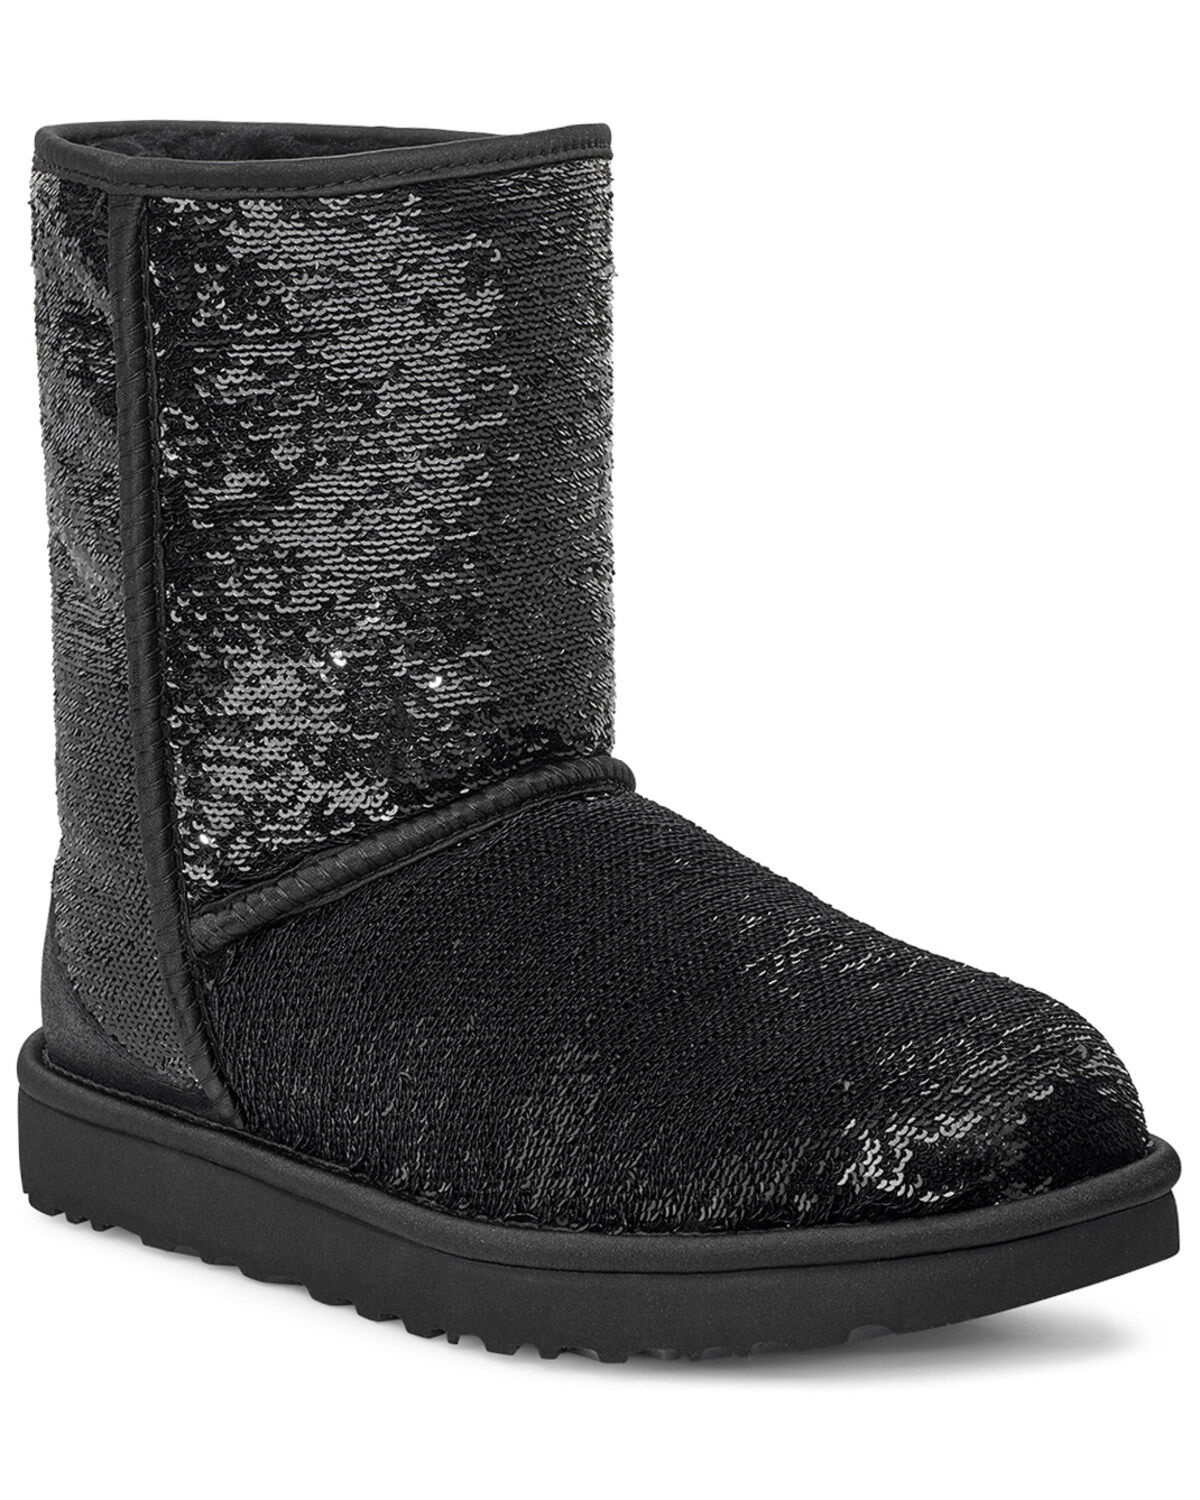 sequin uggs size 